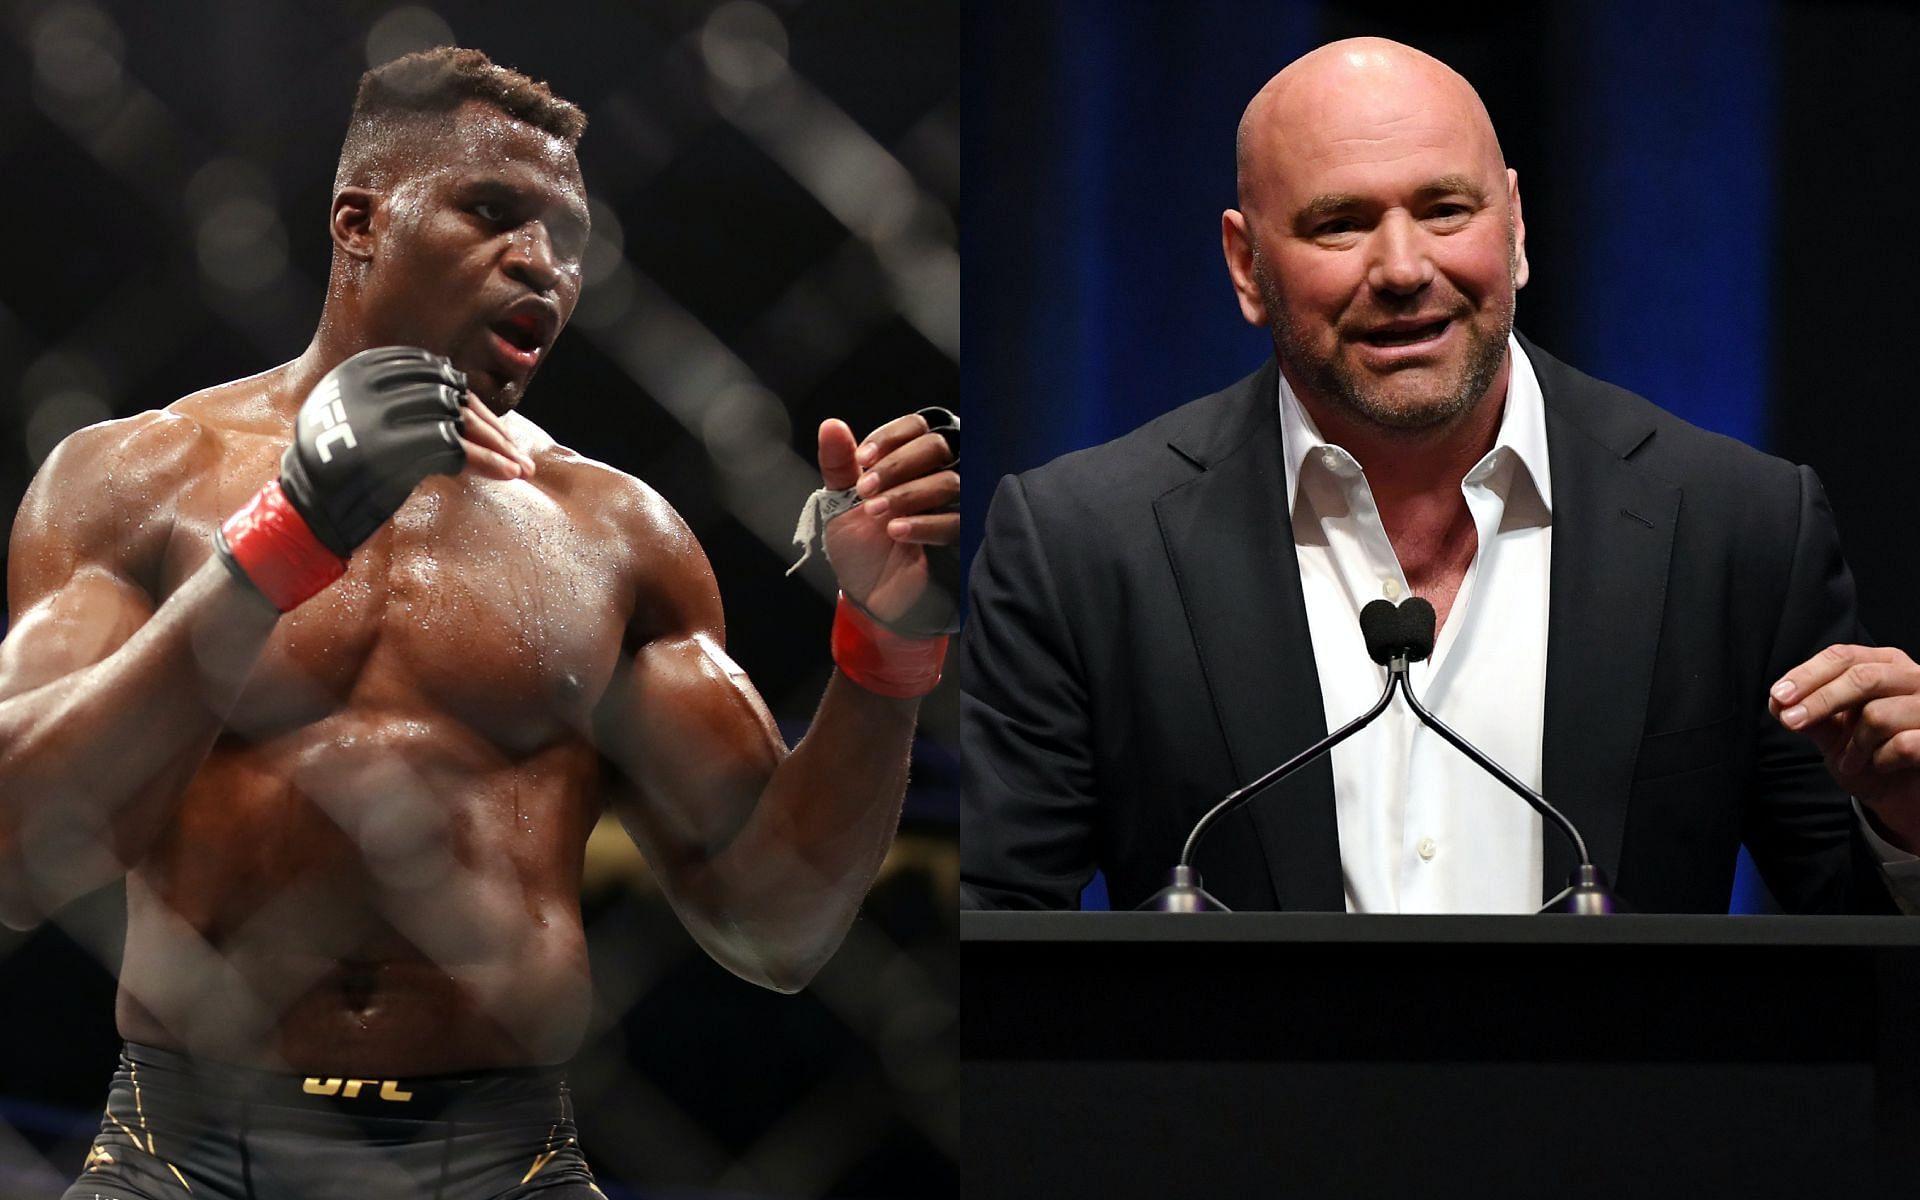 Francis Ngannou (left) and Dana White (right) [Image credits: Getty Images]